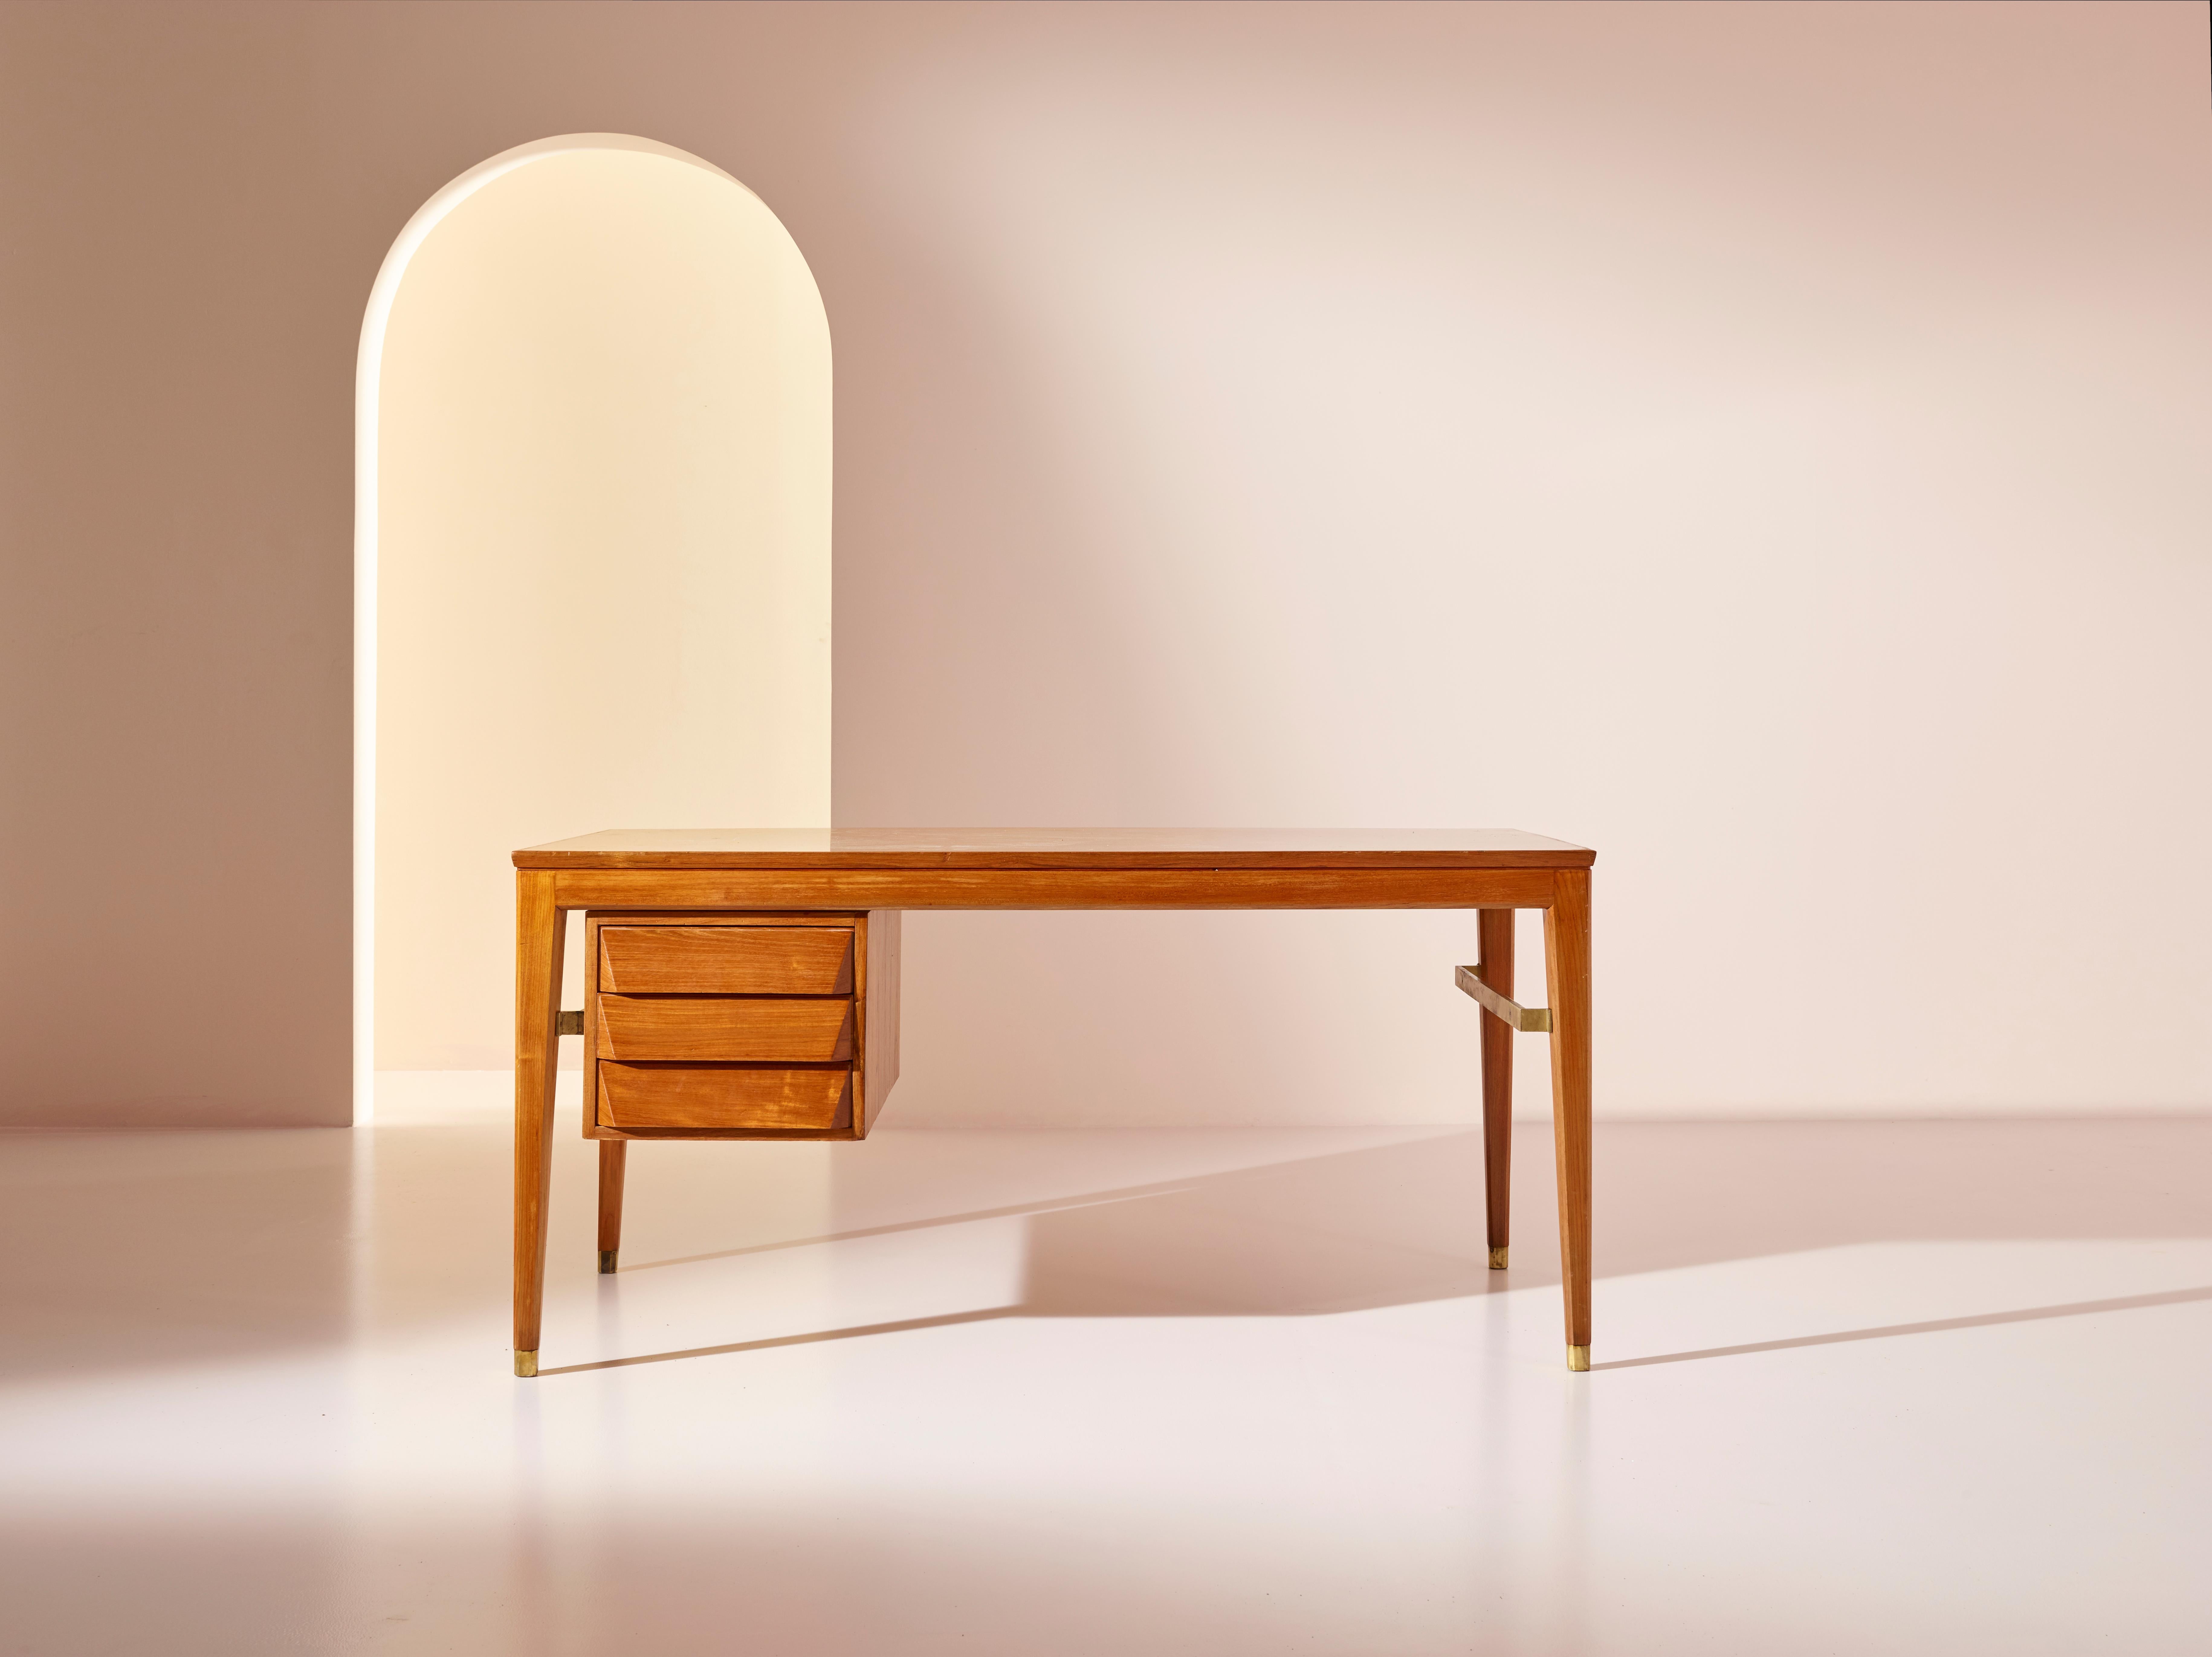 This Gio Ponti Desk, designed for BNL offices and manufactured by Isa Bergamo during the 1950s, is a beautiful piece of furniture that showcases the designer's signature style. 

Made of solid teak wood, the desk features a sleek and elegant